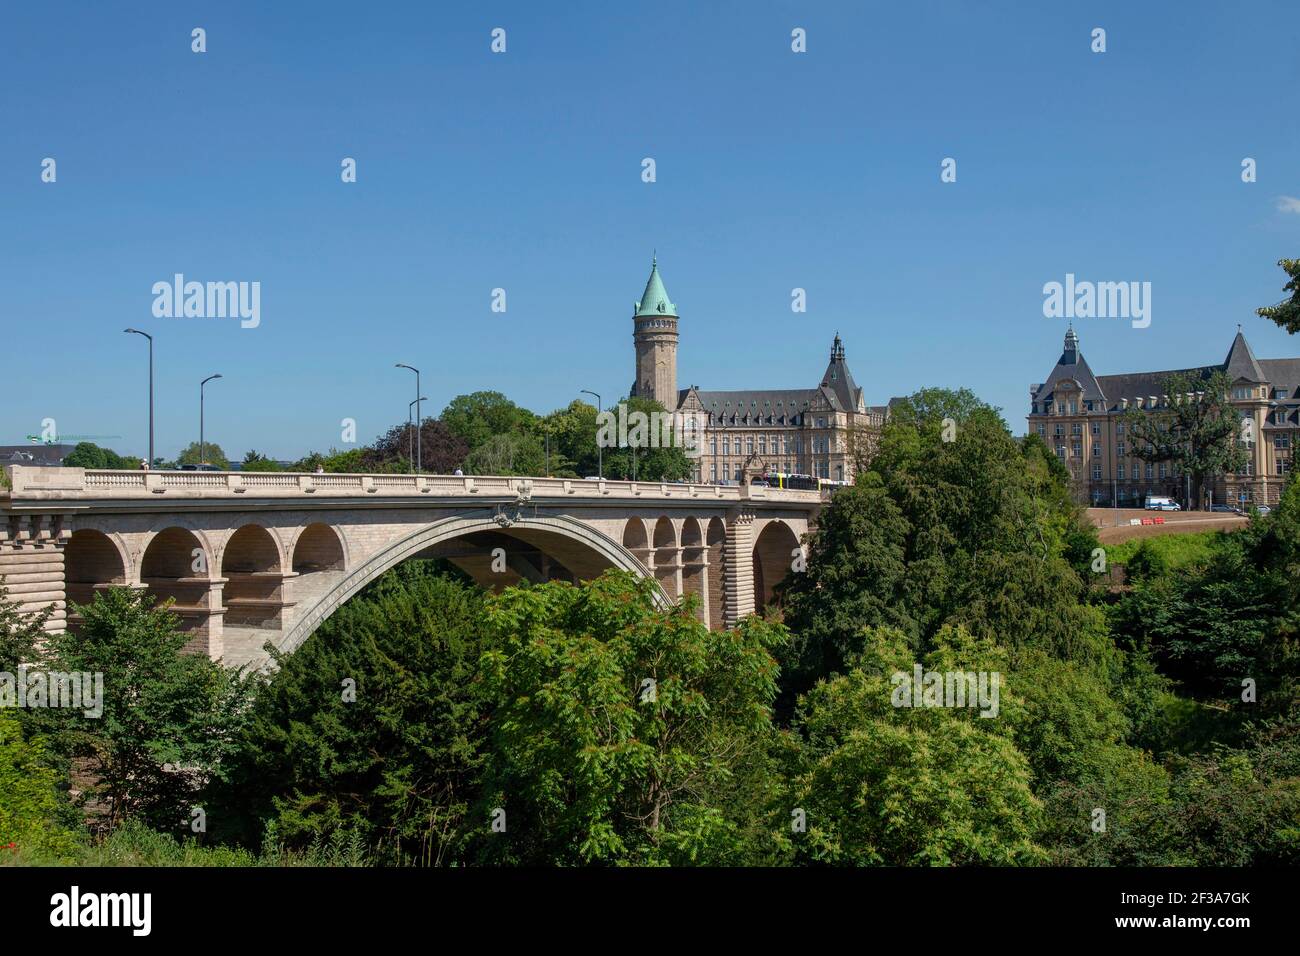 Luxembourg: the Adolphe Bridge across the tree-filled Petrusse Park and the upper city, Luxembourg City. Stock Photo